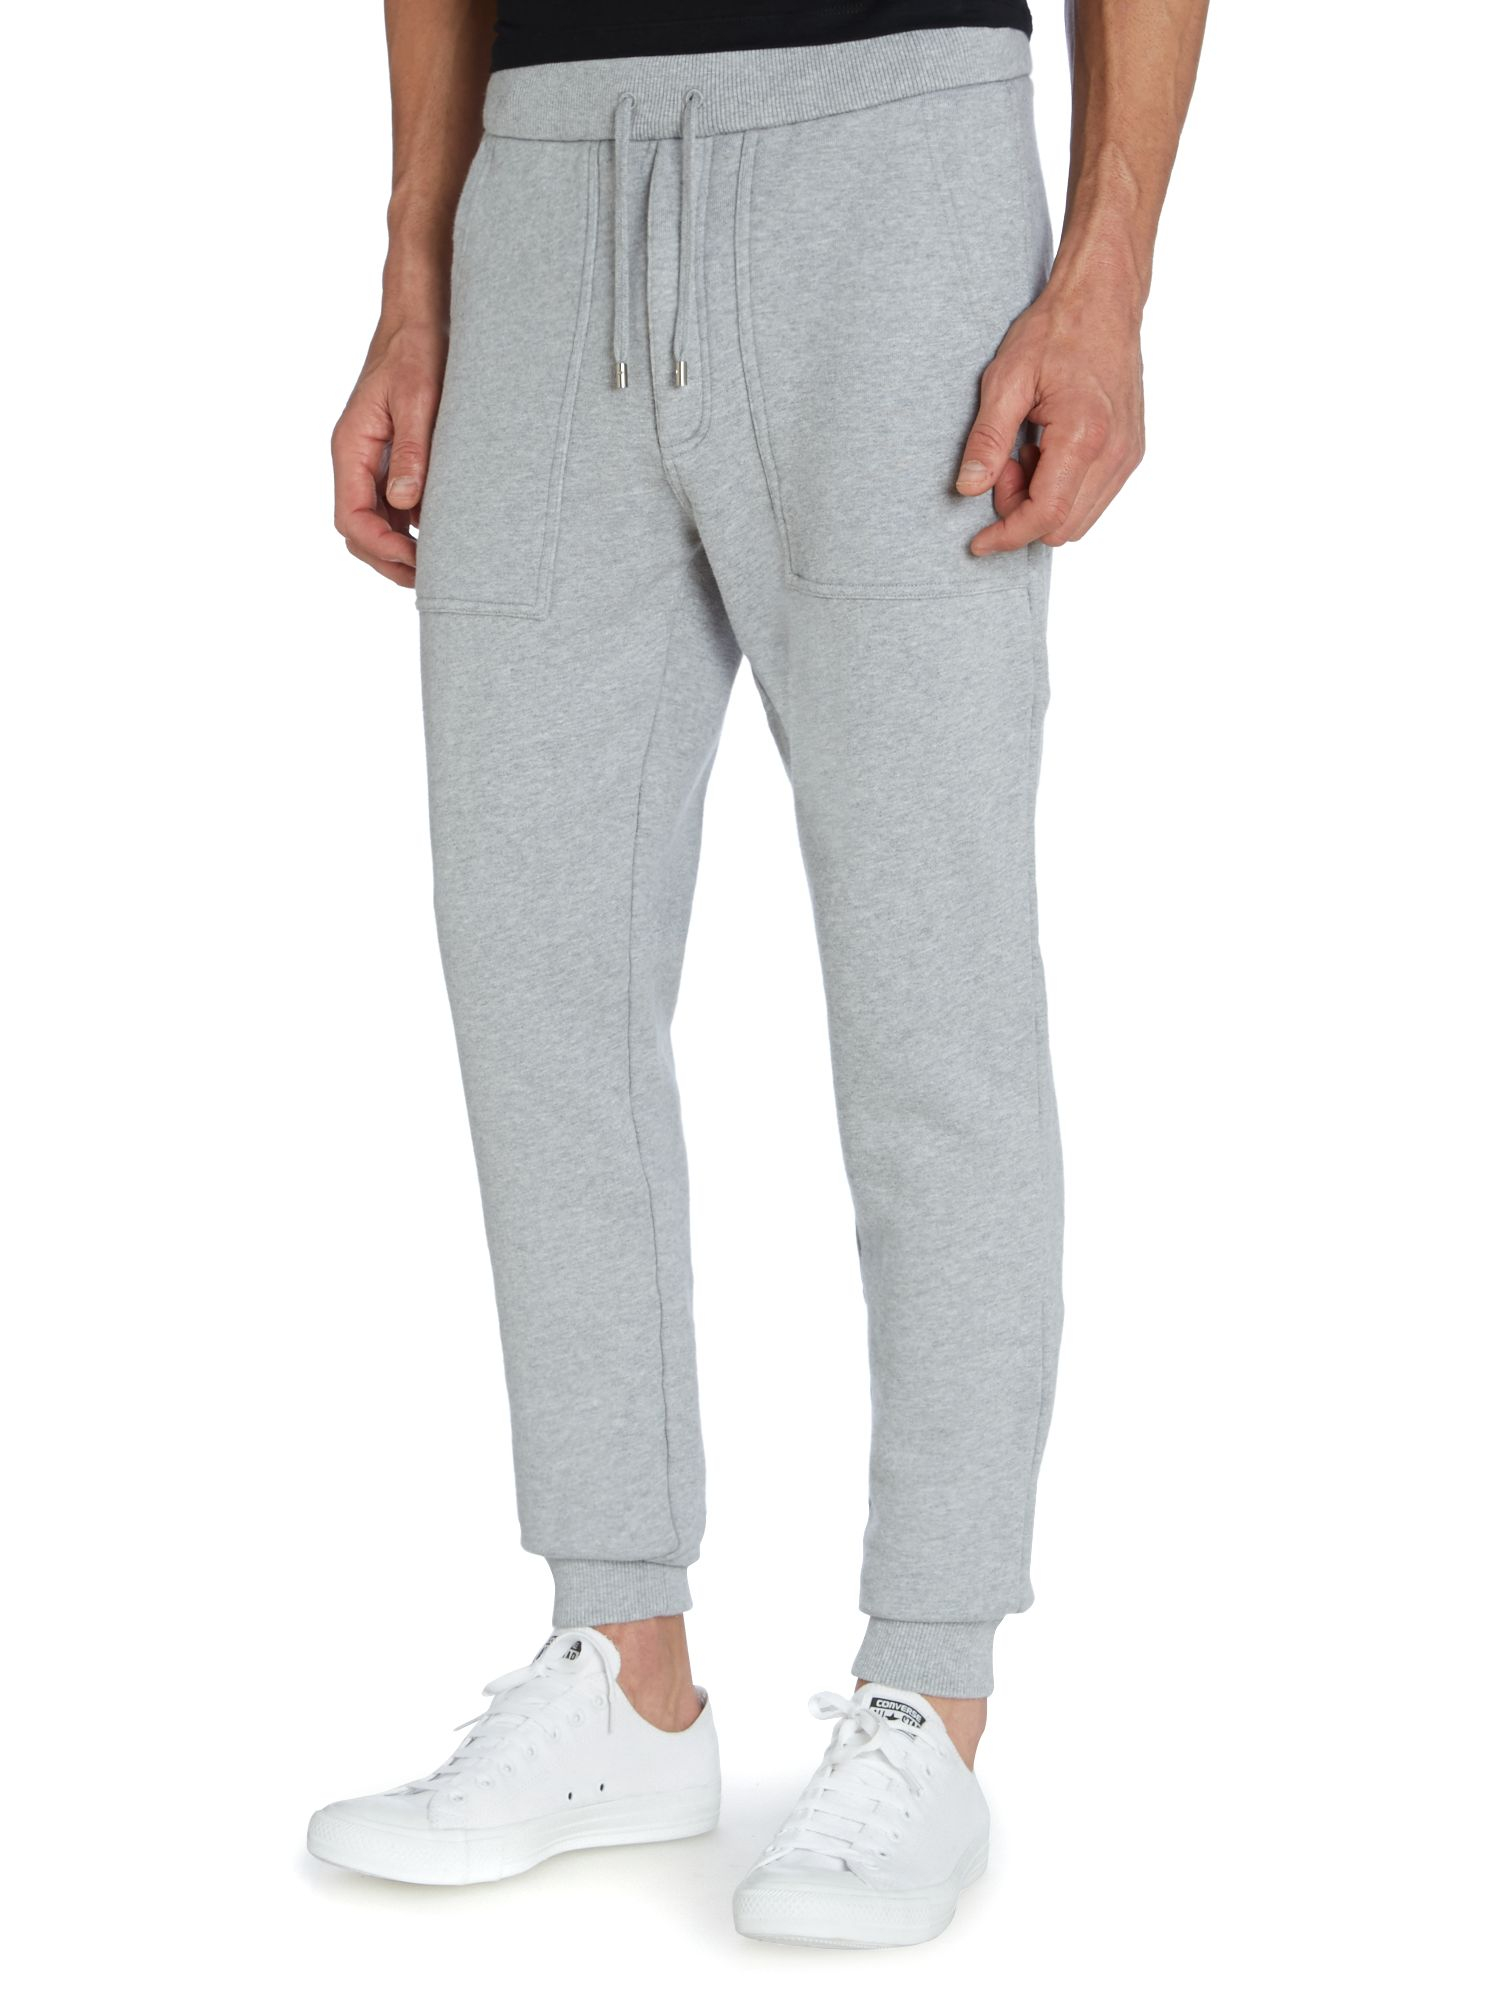 Michael kors Overdyed Sweat Pants in Gray for Men | Lyst